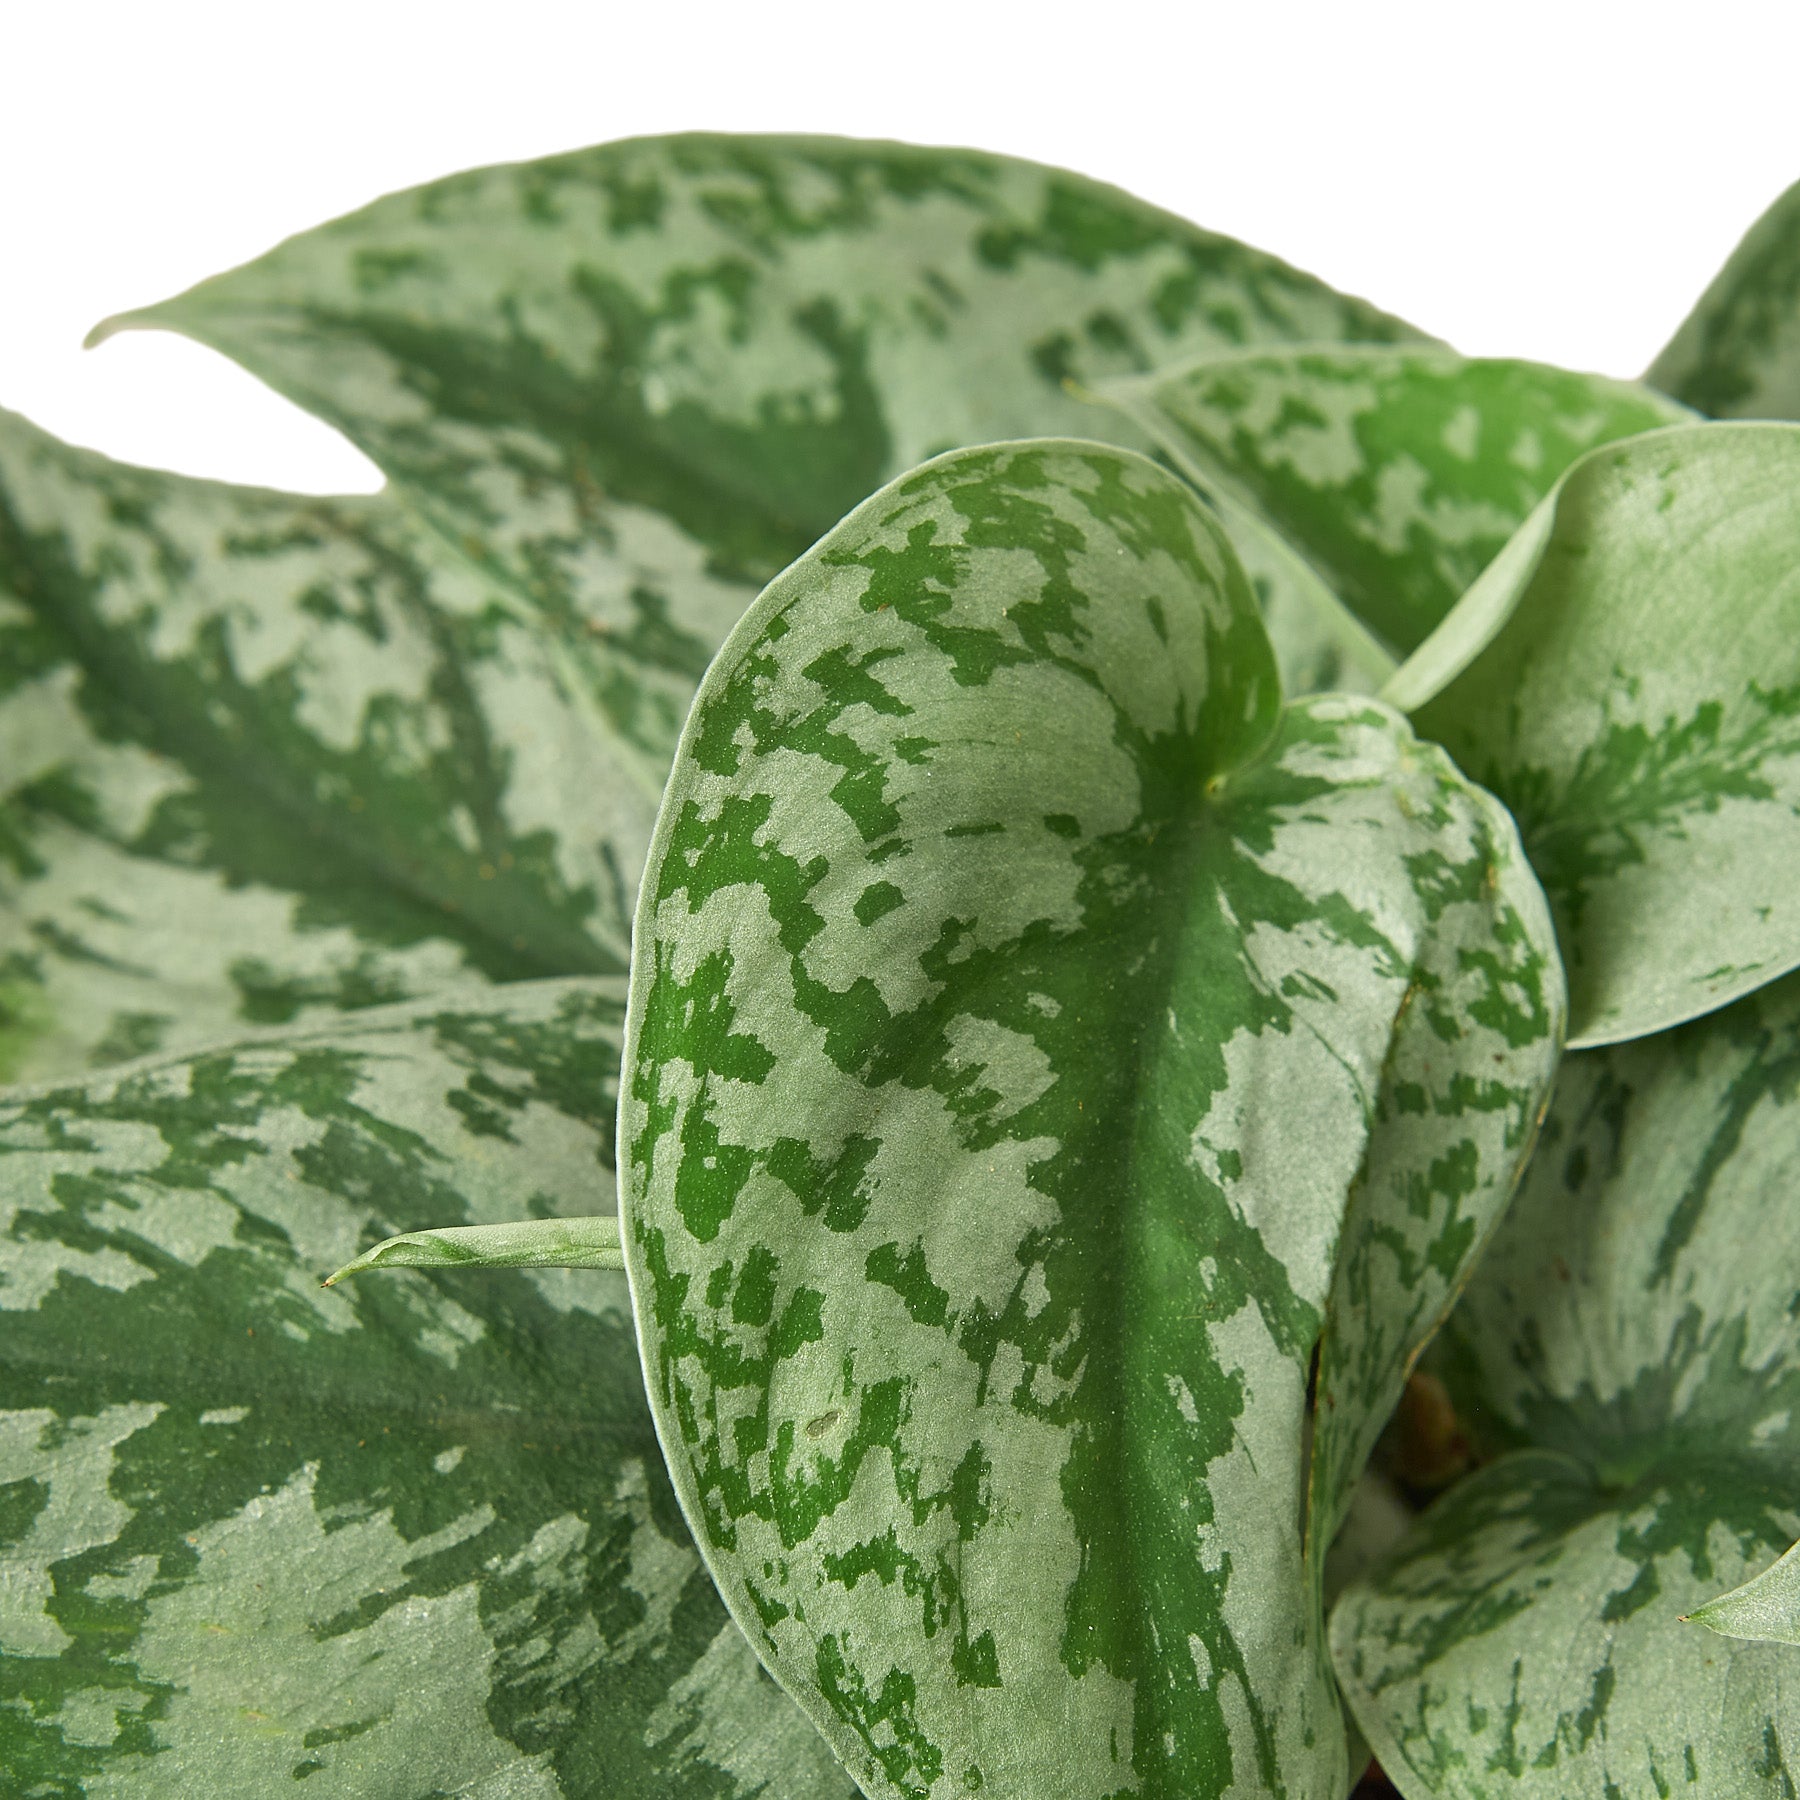 A plant with green and white leaves on a white background, available at the best plant nursery near me.